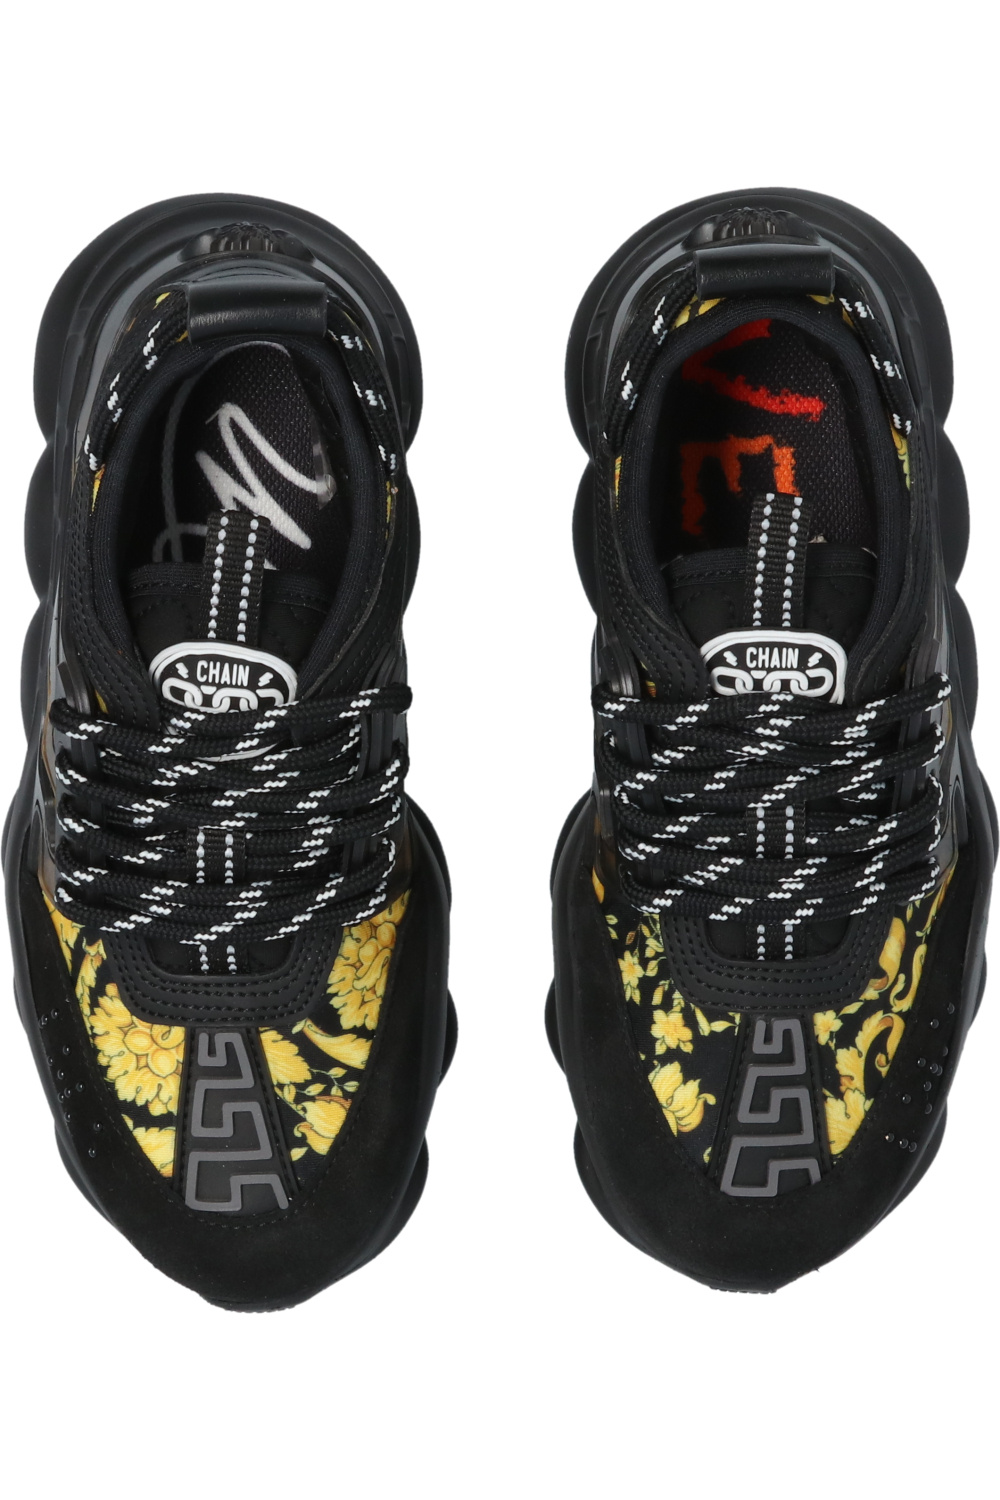 White 'Chain Reaction' sneakers with logo Versace - Vitkac France